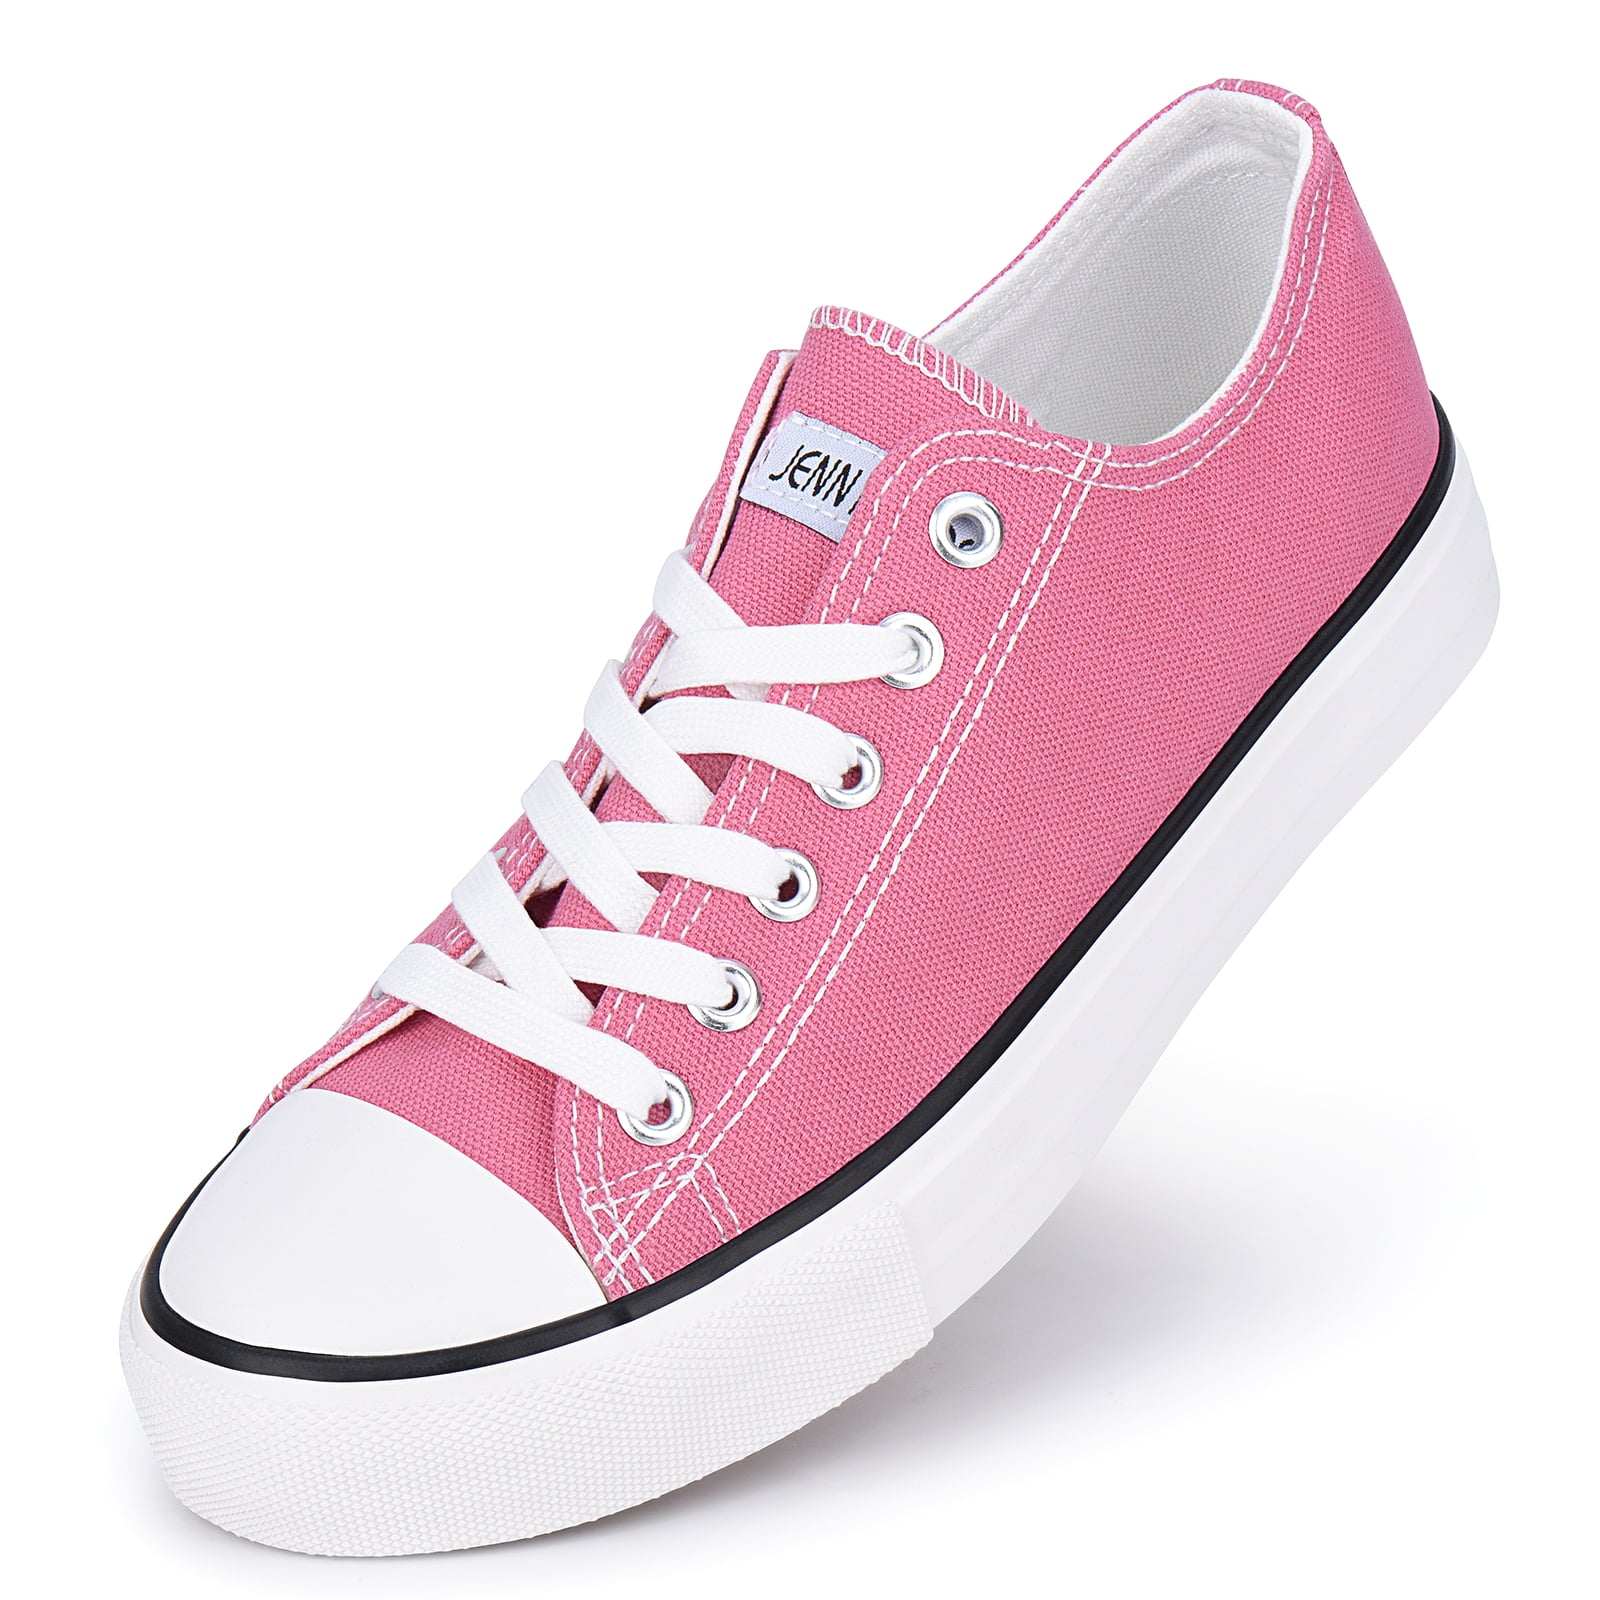 Women's Canvas Shoes Fashion Sneakers Low Top Tennis Shoes Lace up Casual Walking Shoes